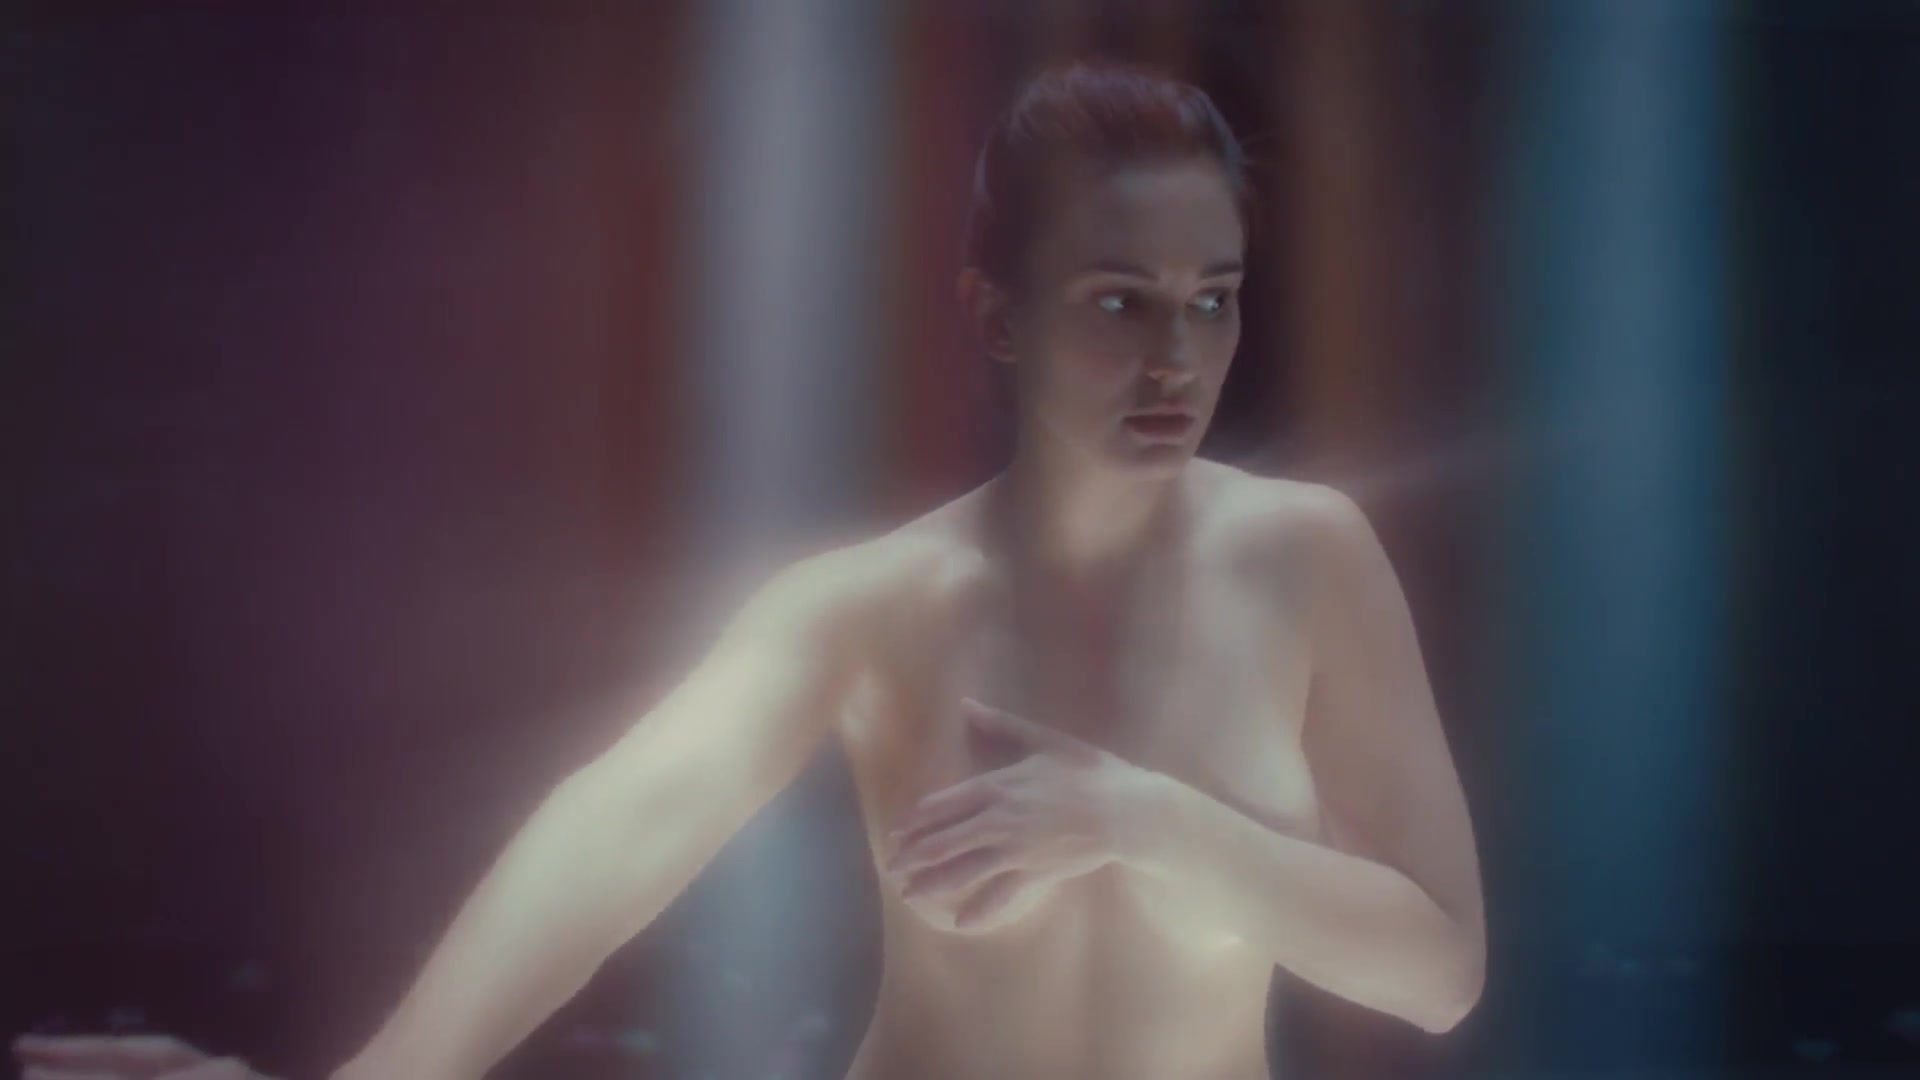 Dominique Provost-Chalkley, Katherine Barrell, ass, naked, nude, sex, sex s...